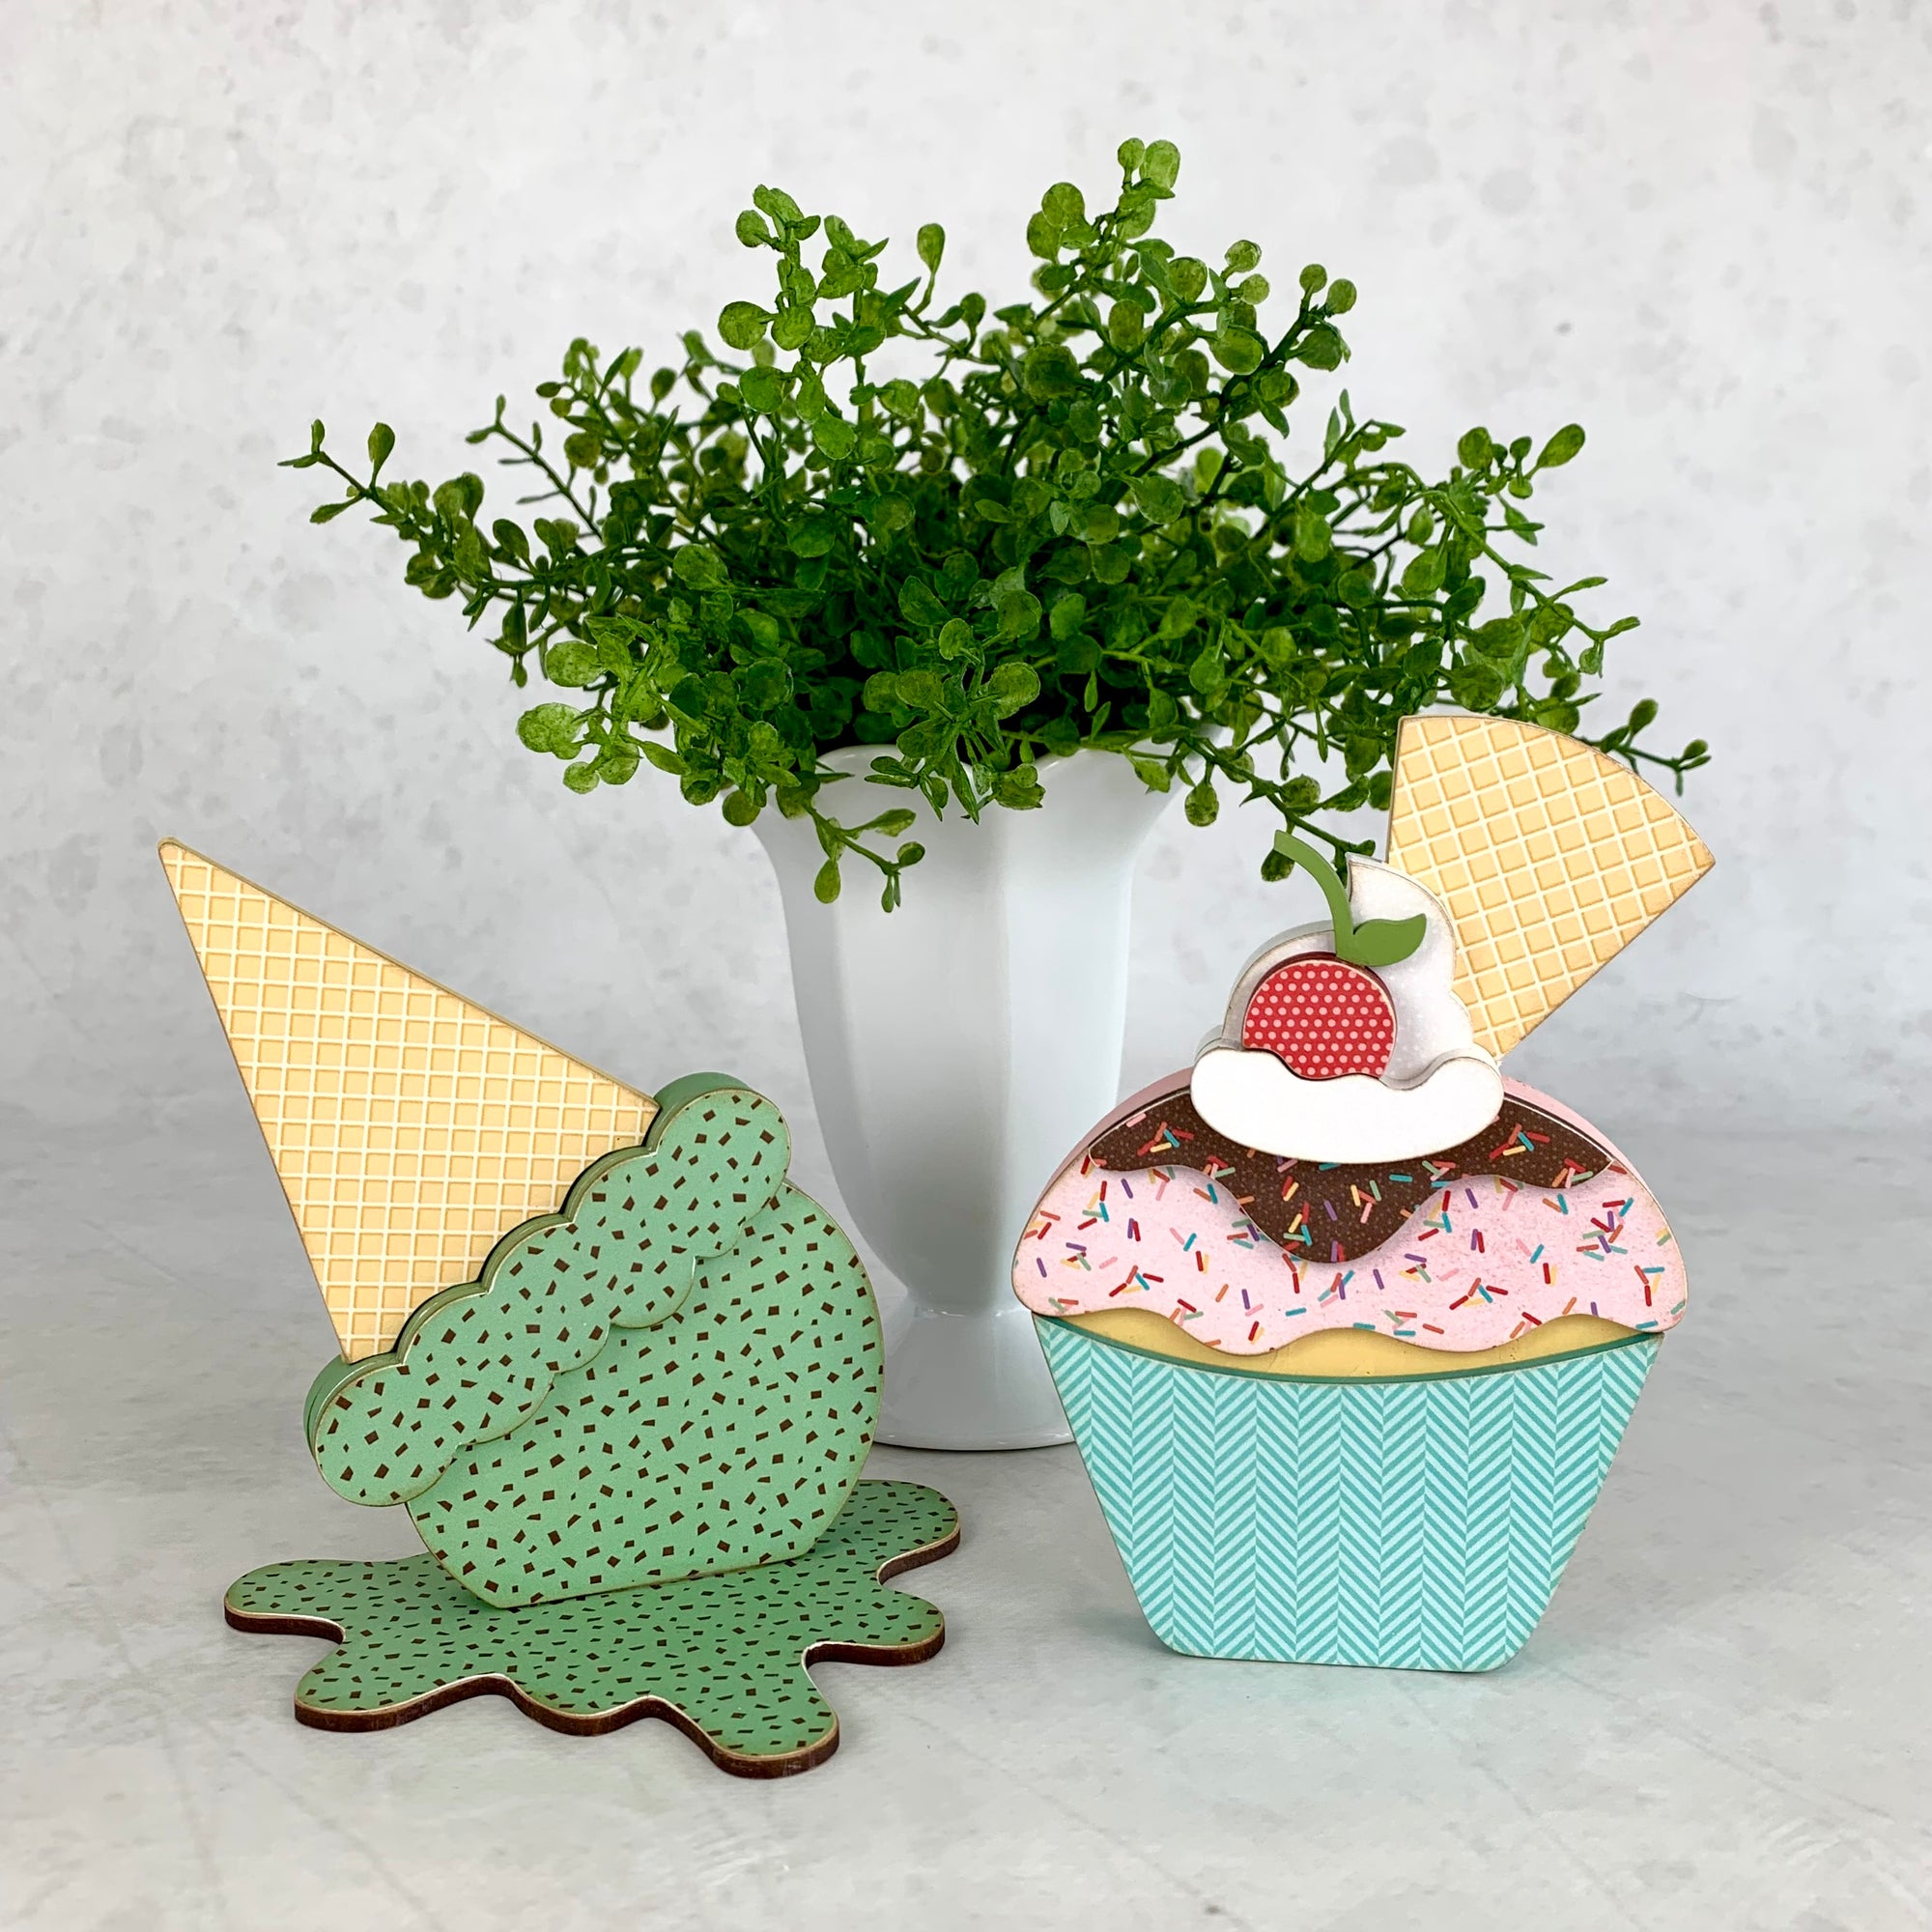 Melted ice cream cone and cupcake for styling birthday and ice cream themed tiered trays.  Ice cream cone and cupcake wood decor. Handmade wood decor crafts. Cupcake with a cherry on top.  Mint chip flavored ice cream cone.  Birthday decorations. Ice cream themed decorations. 